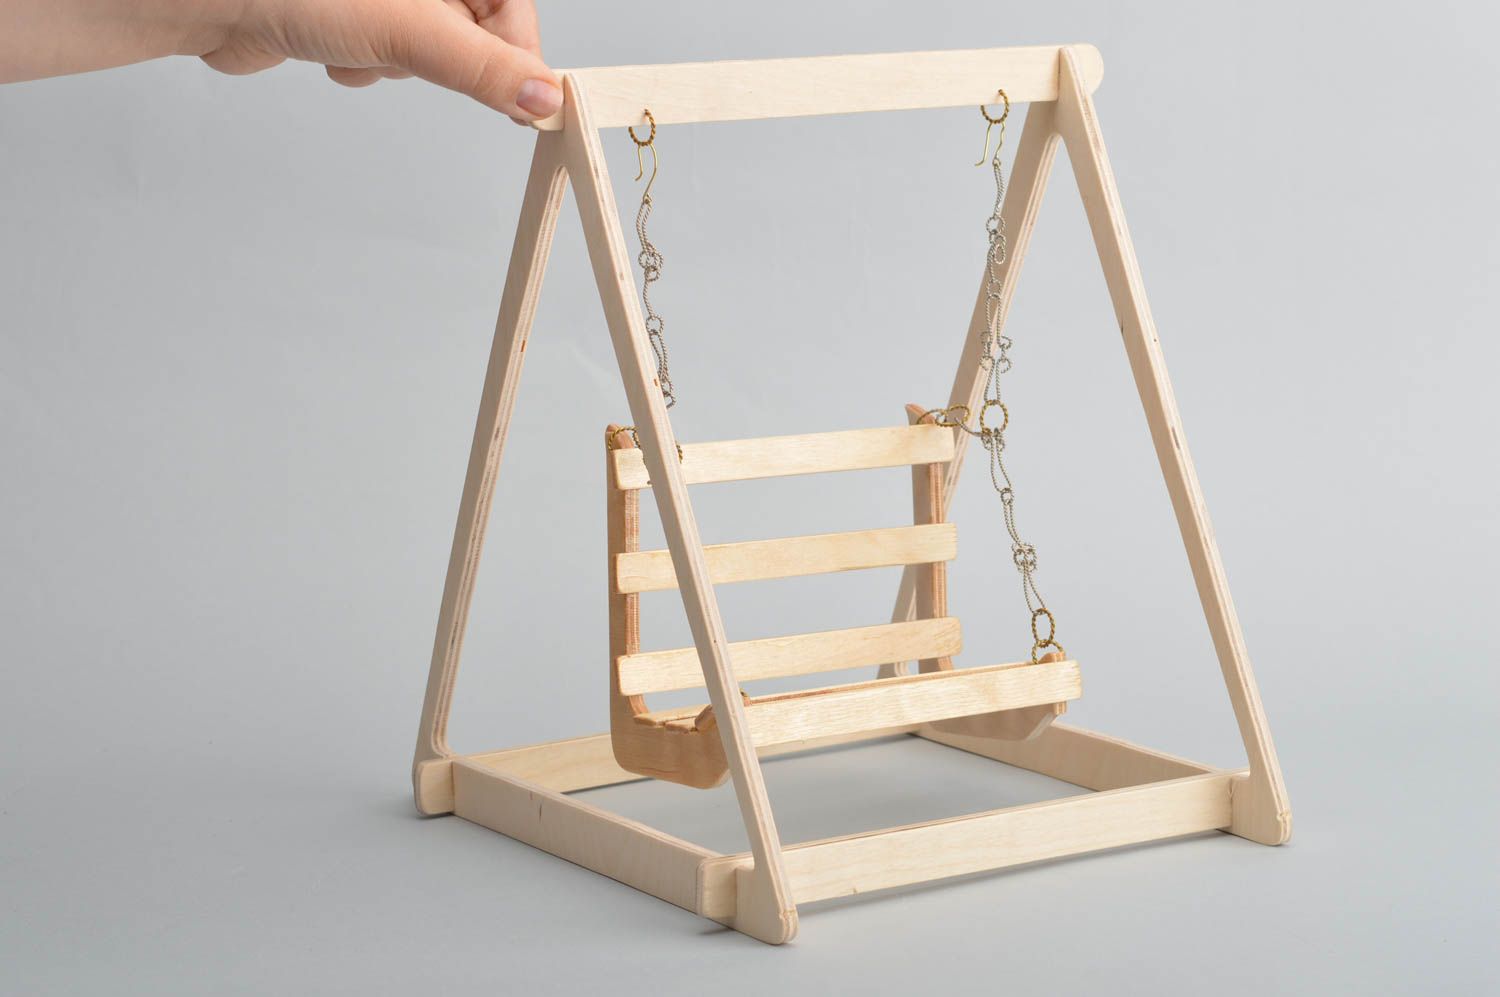 Toy swing made of plywood designer beautiful handmade present for children photo 3